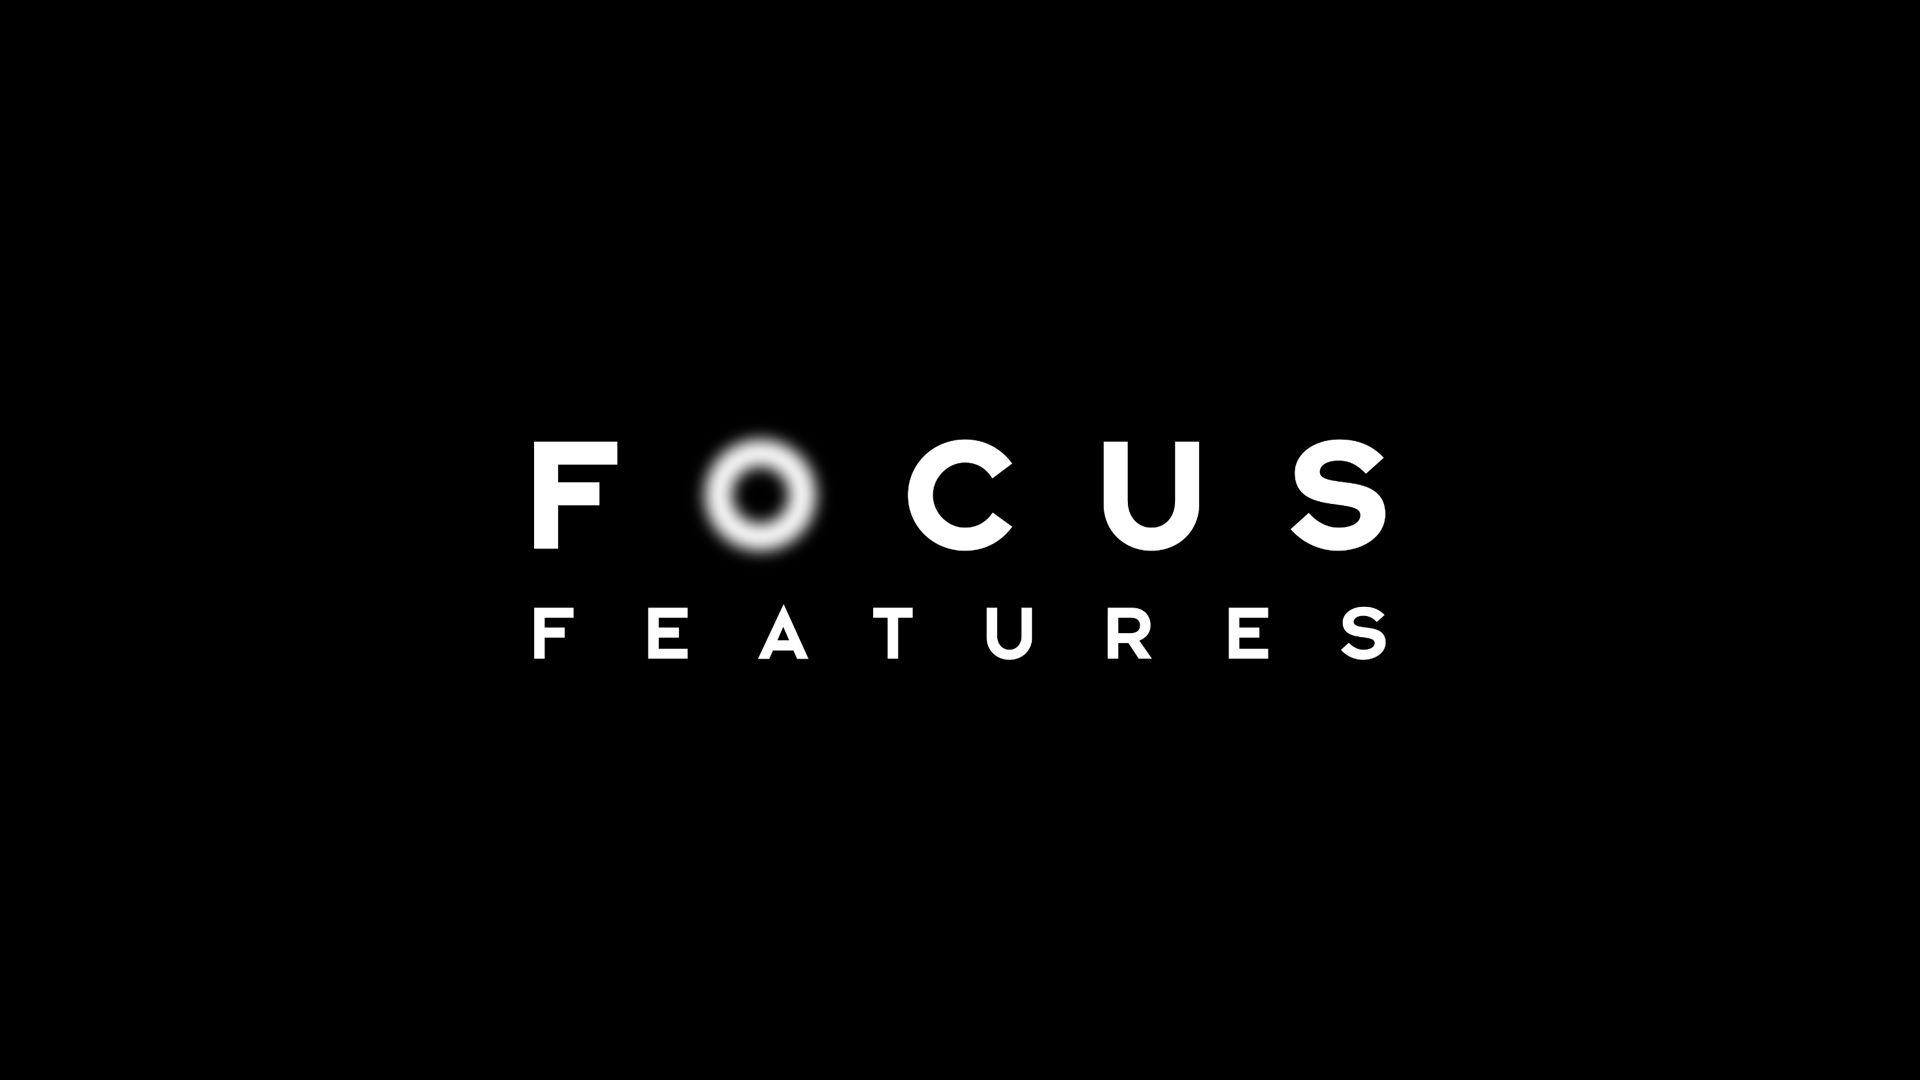 2014-2015 Logo - Focus Features/Other | Logopedia | FANDOM powered by Wikia